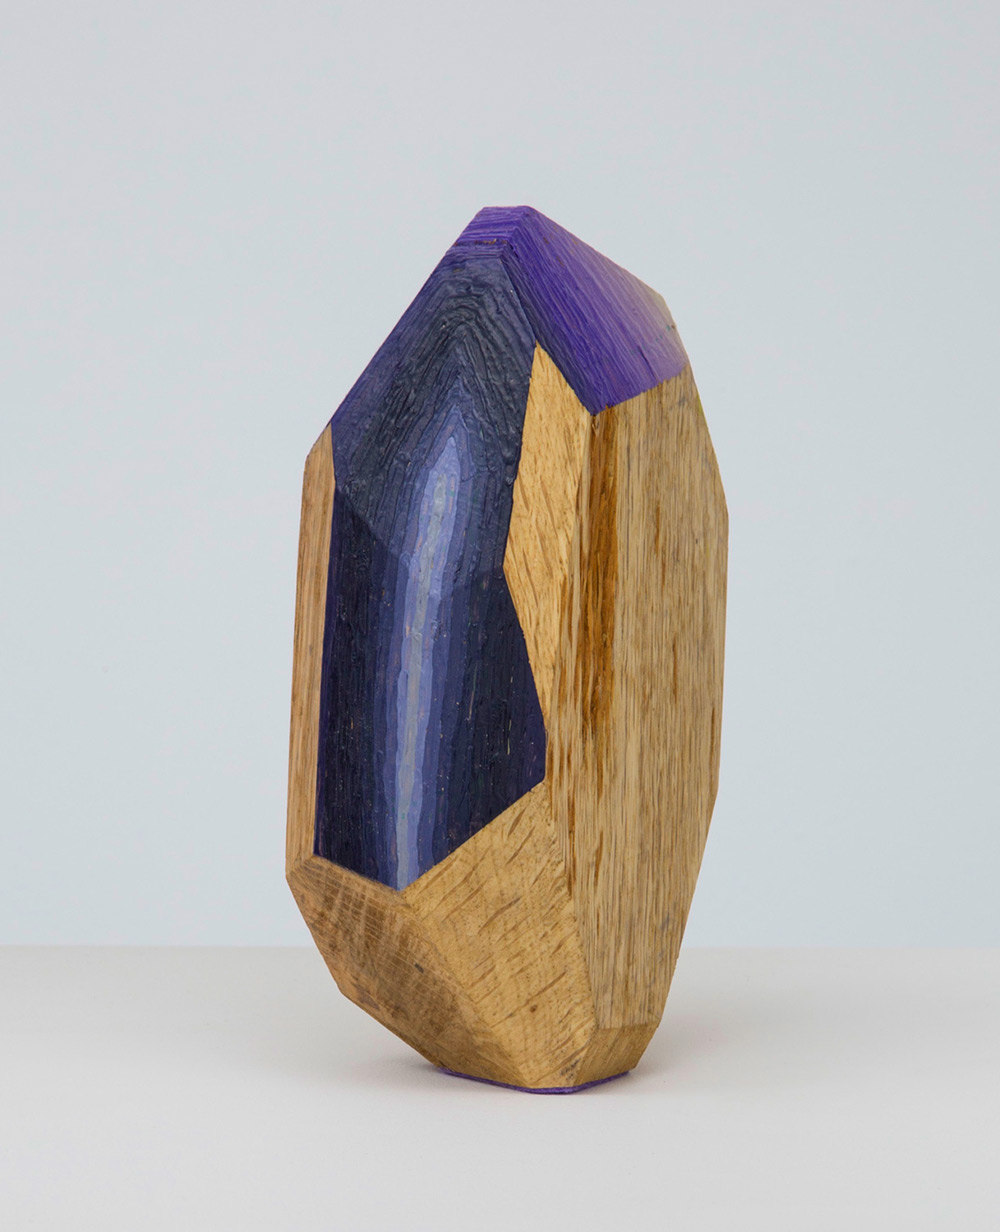 Wood Gemstones Colorful Abstract Sculptures By Victoria Wagner (10)